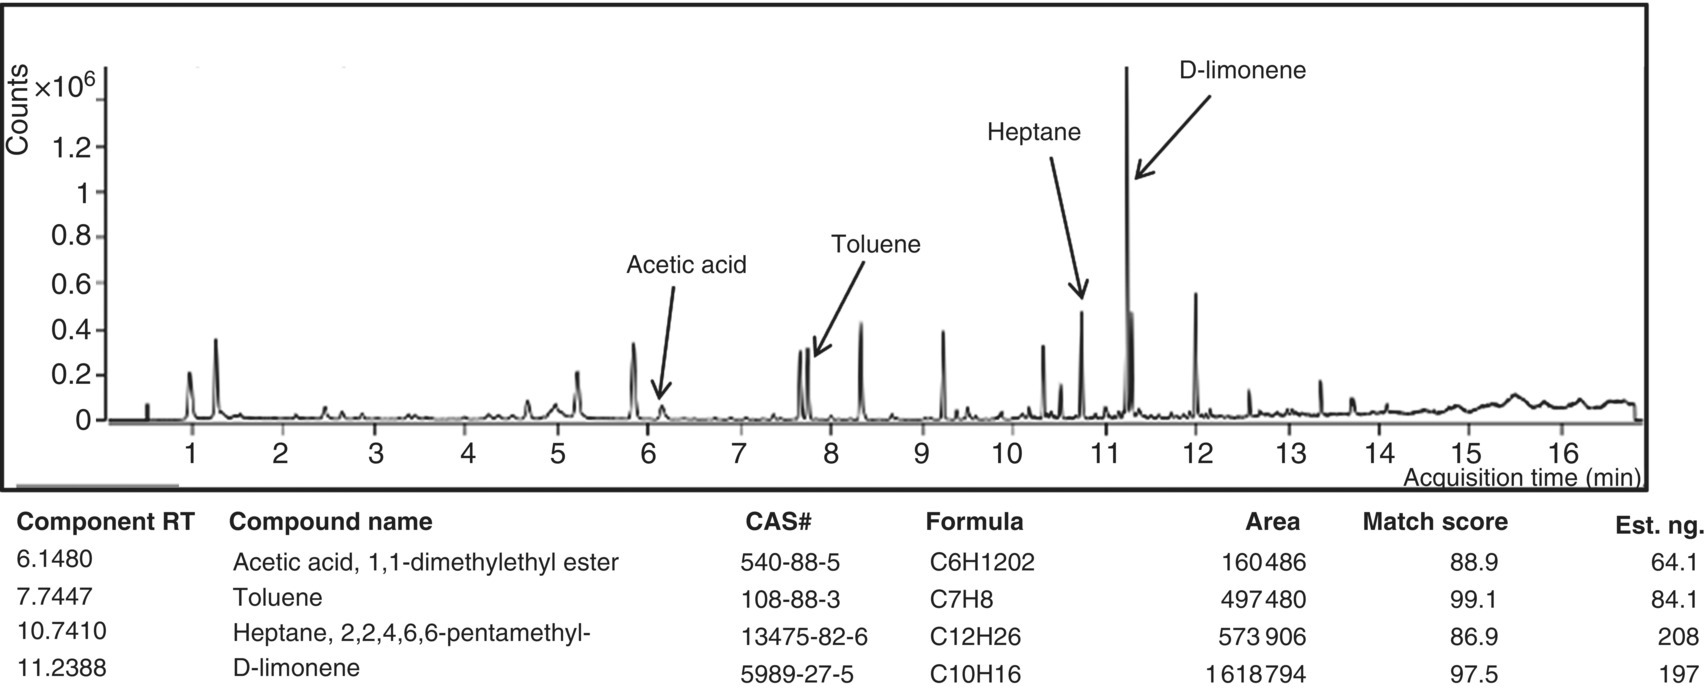 A chromatogram with arrows marking the peaks for acetic acid, toluene, heptane, and ᴅ-limonene.